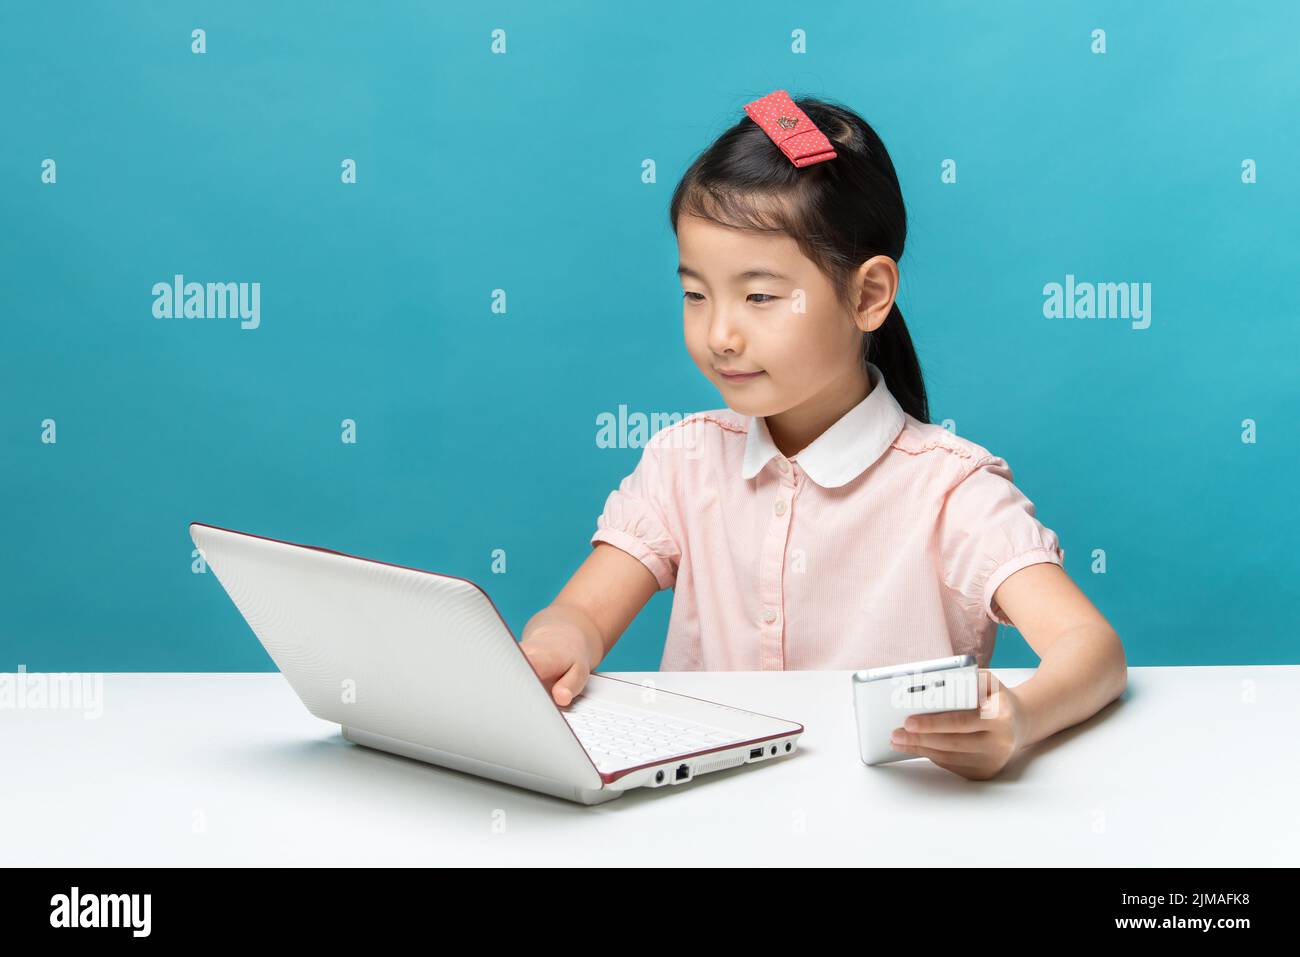 Cute asia little girl is sitting at table with her white laptop and a smartphones, isolated over blu Stock Photo